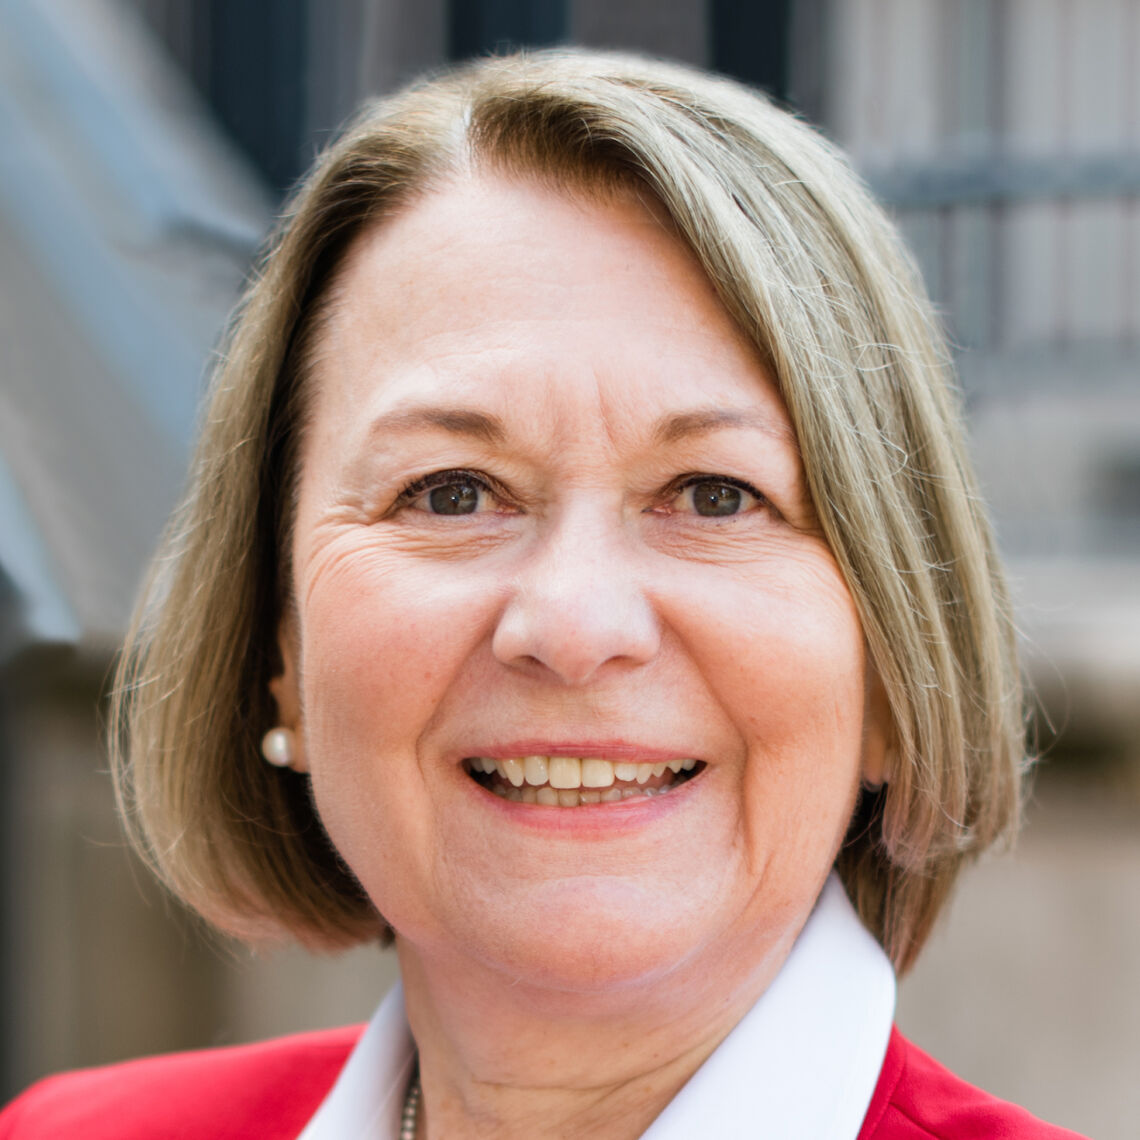 Kathleen E. Harring '80 will receive an honorary doctorate of humane letters at Franklin & Marshall's Commencement. Harring is the president of Muhlenberg College in Allentown, Pa. She is Muhlenberg's 13th president and the first woman to lead the 175-year-old college.